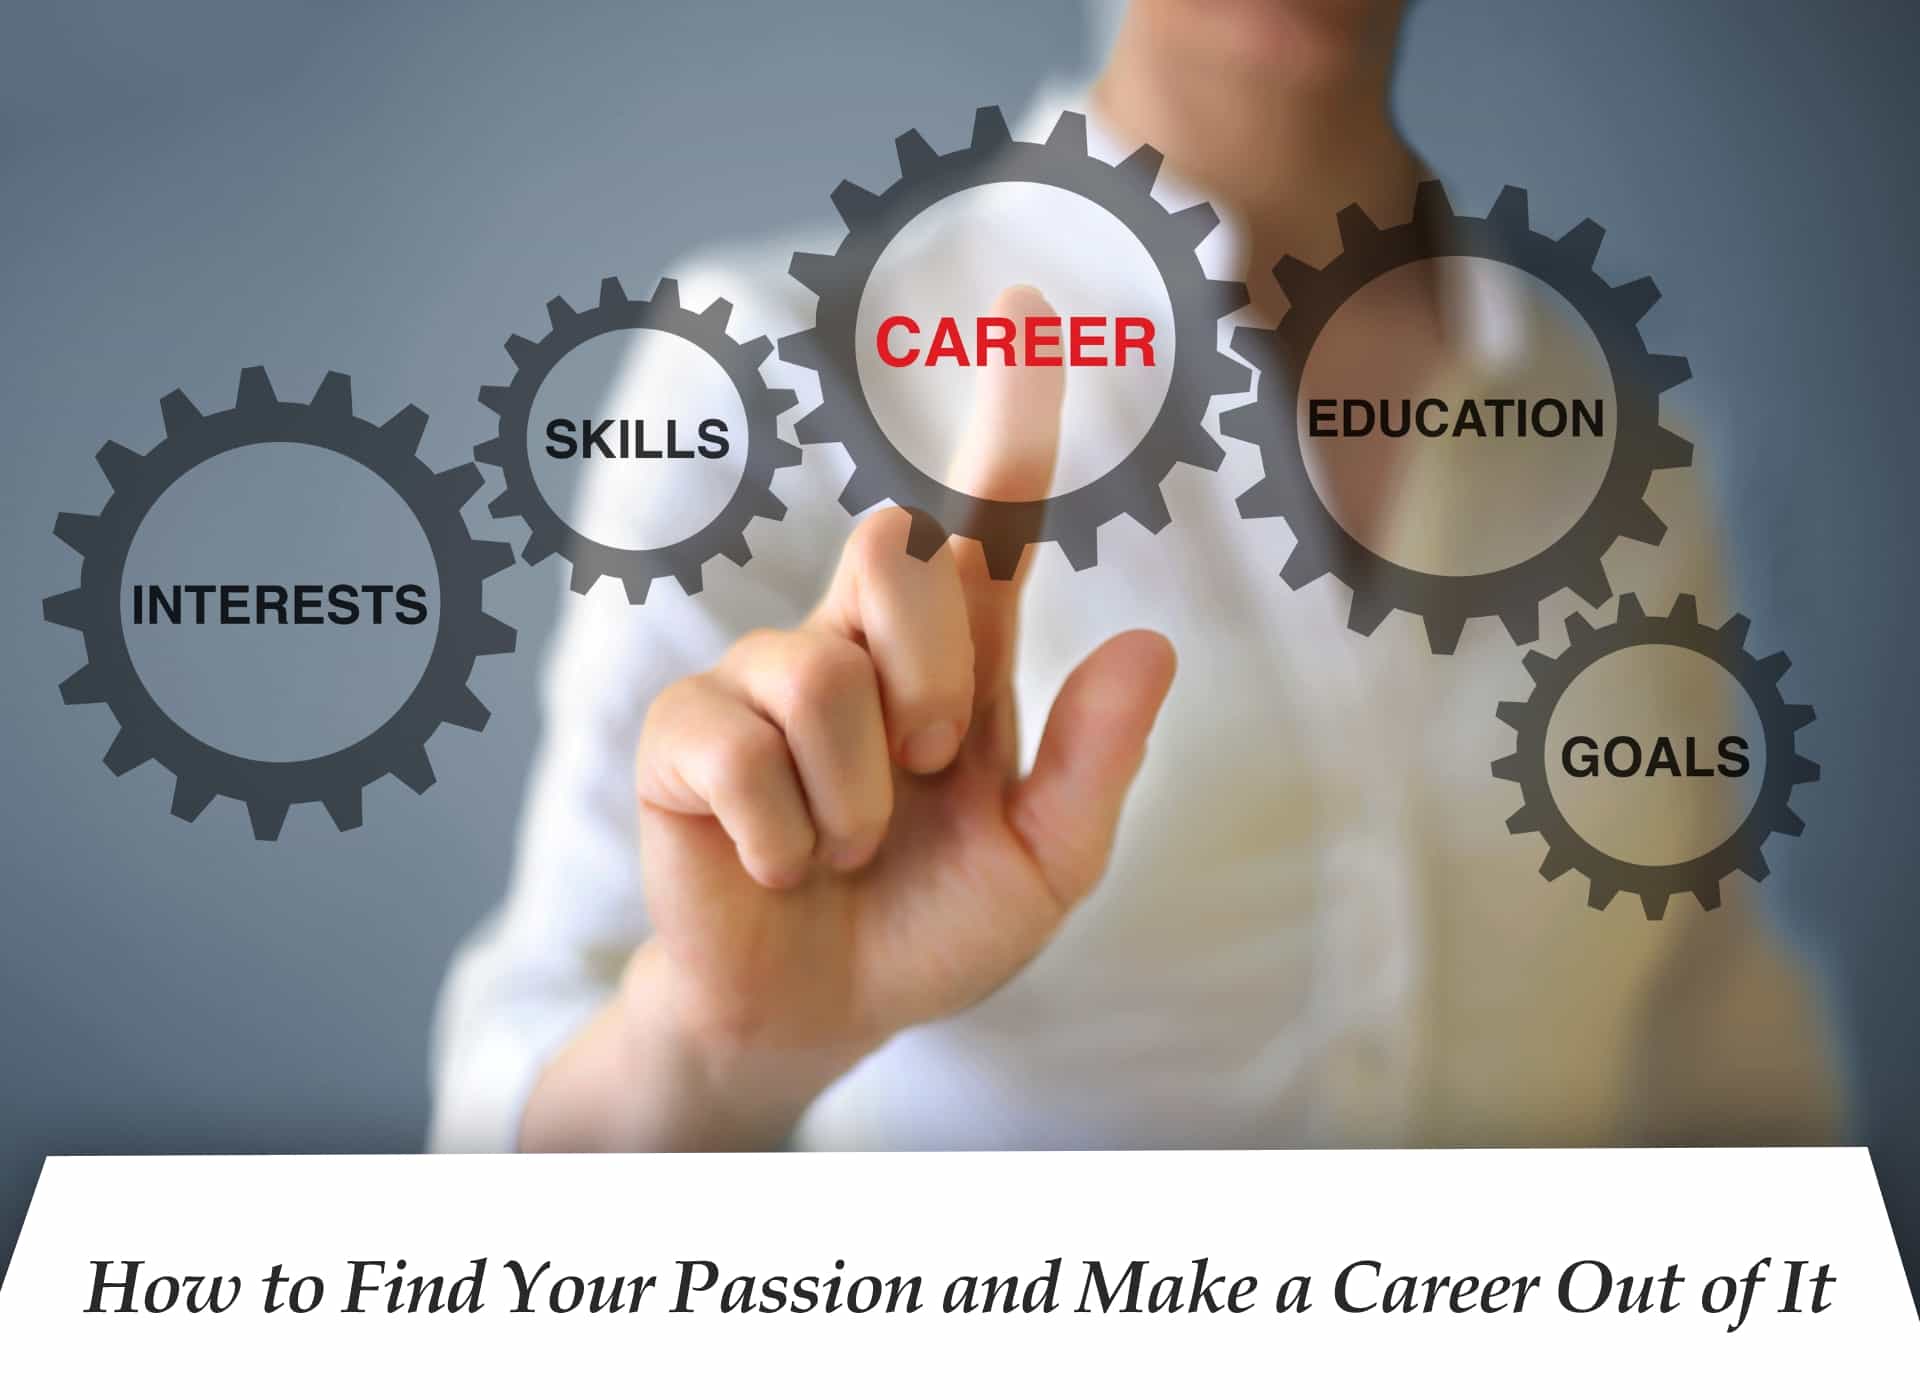 How to find your passion